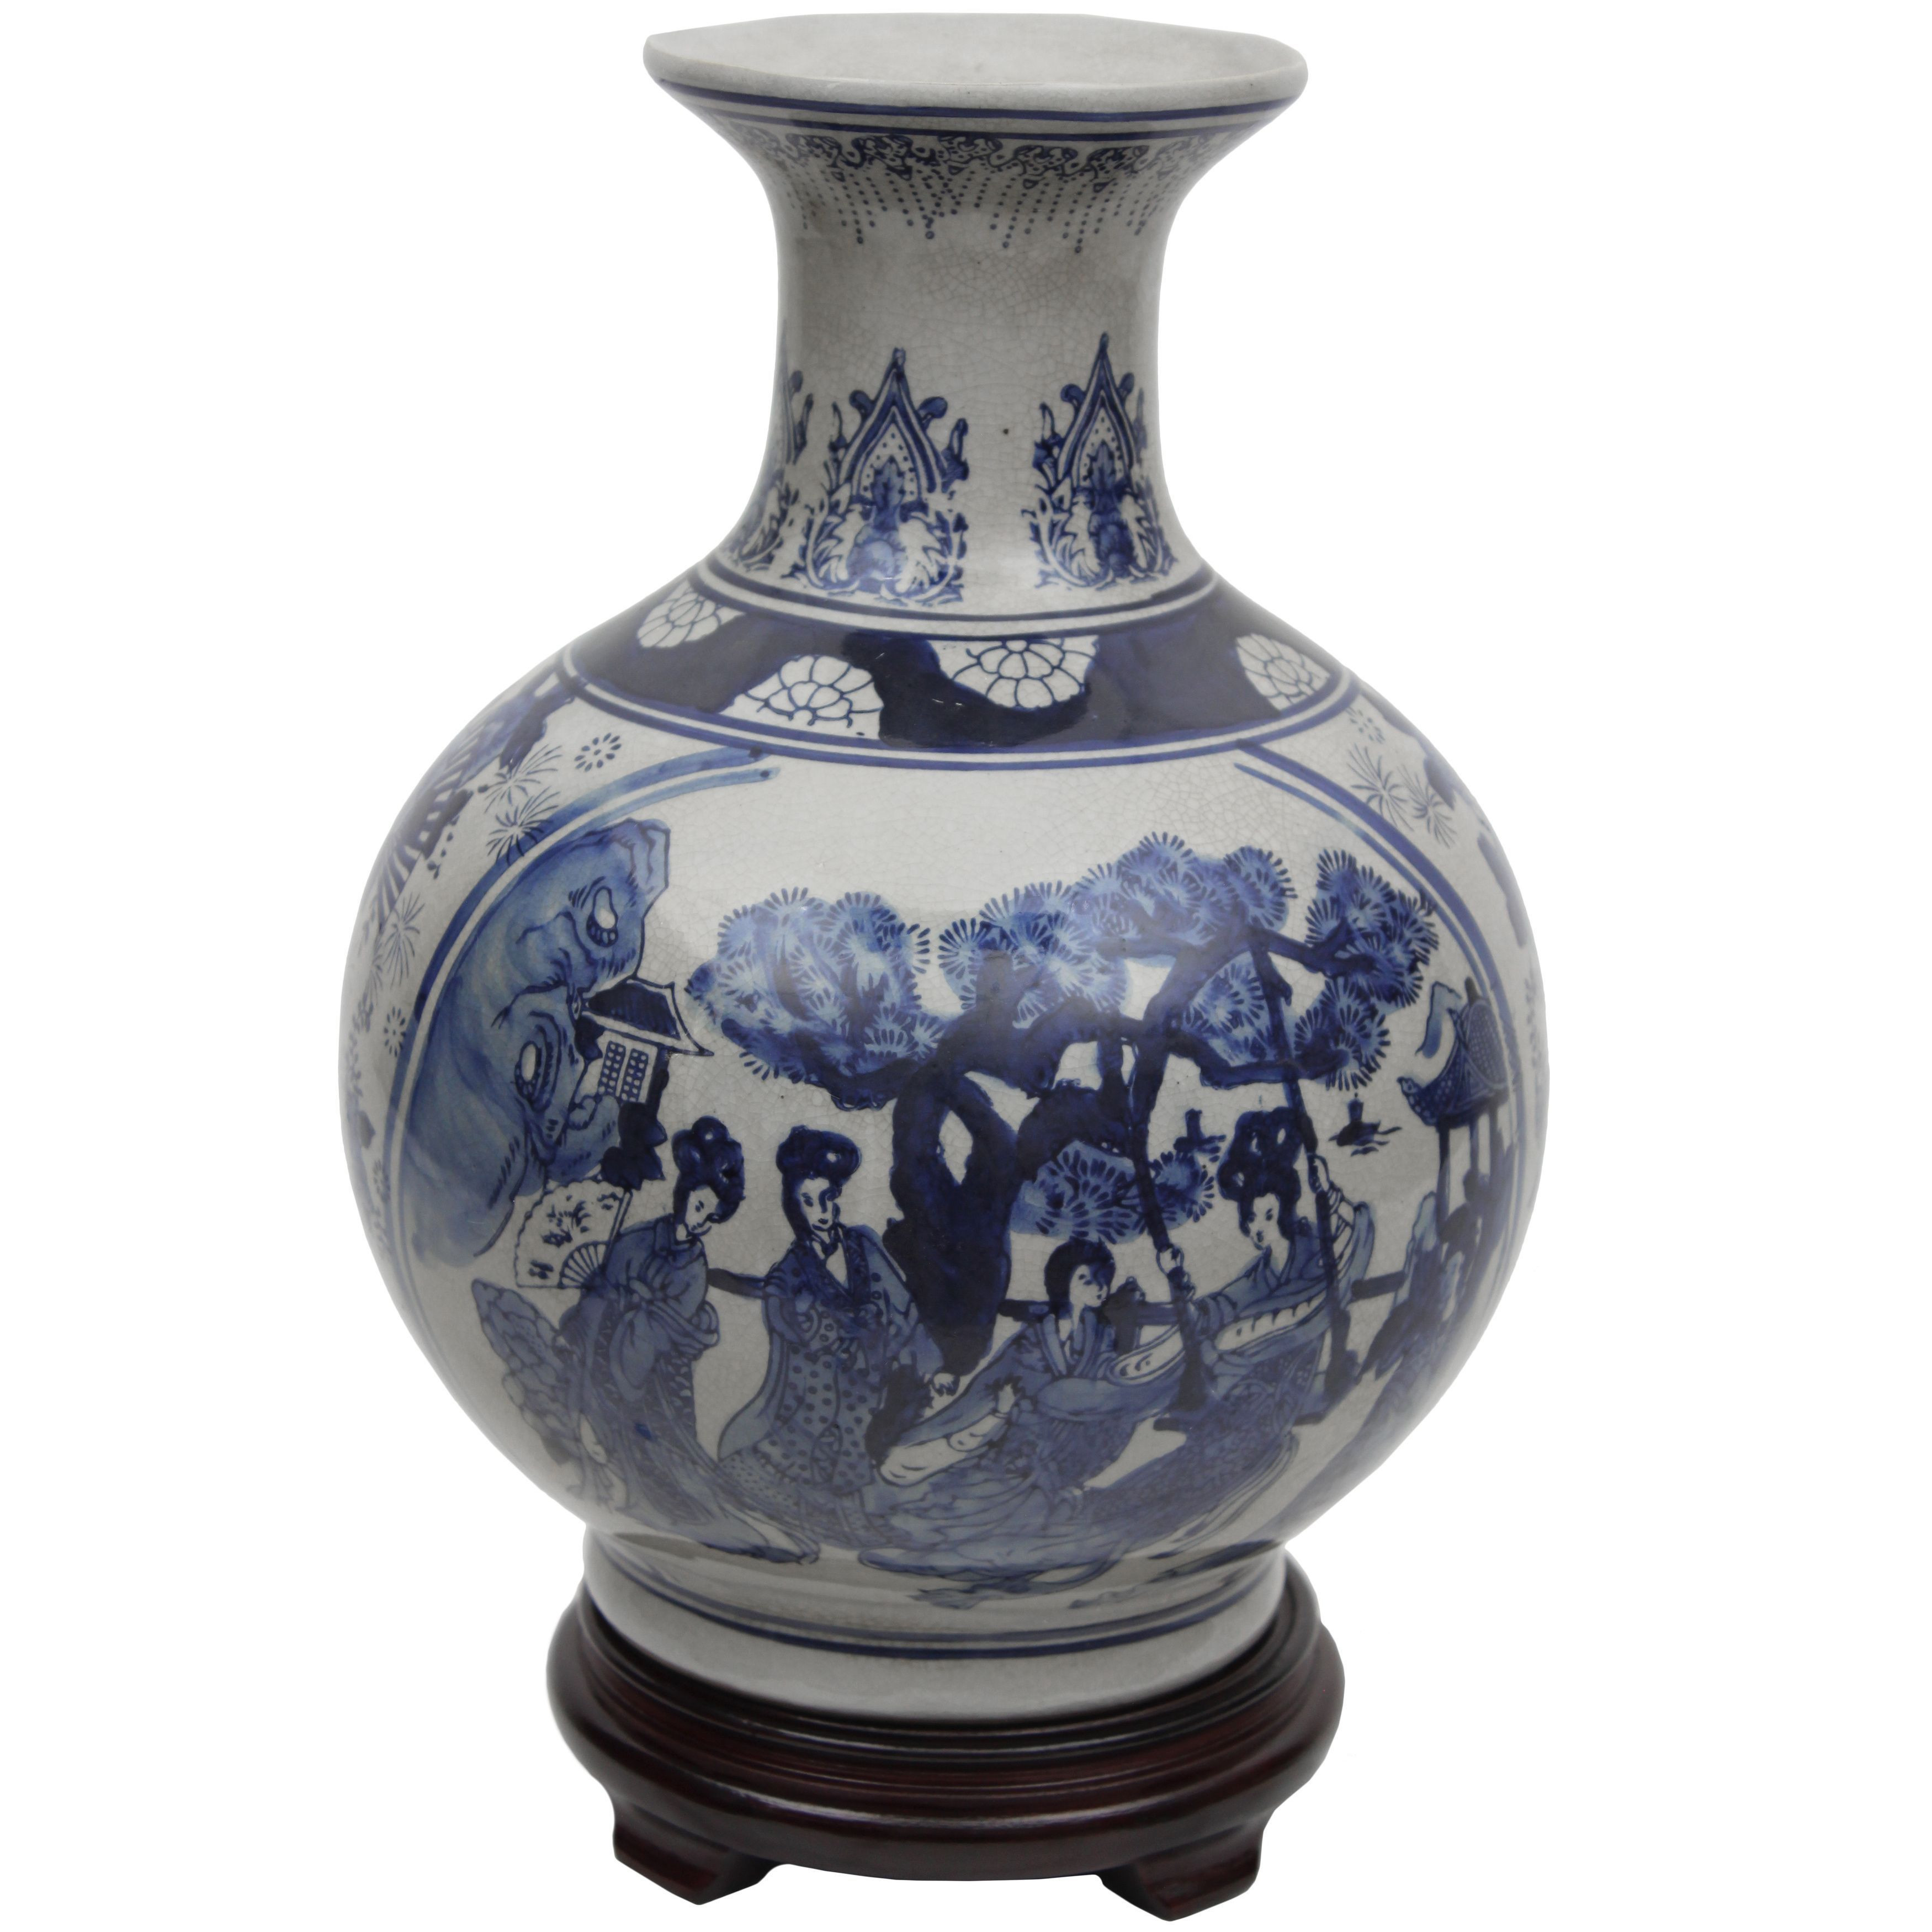 16 Perfect Antique Chinese Vases for Sale 2022 free download antique chinese vases for sale of photos of white pottery vase vases artificial plants collection for handmade 14 inch blue and white porcelain vase china size medium